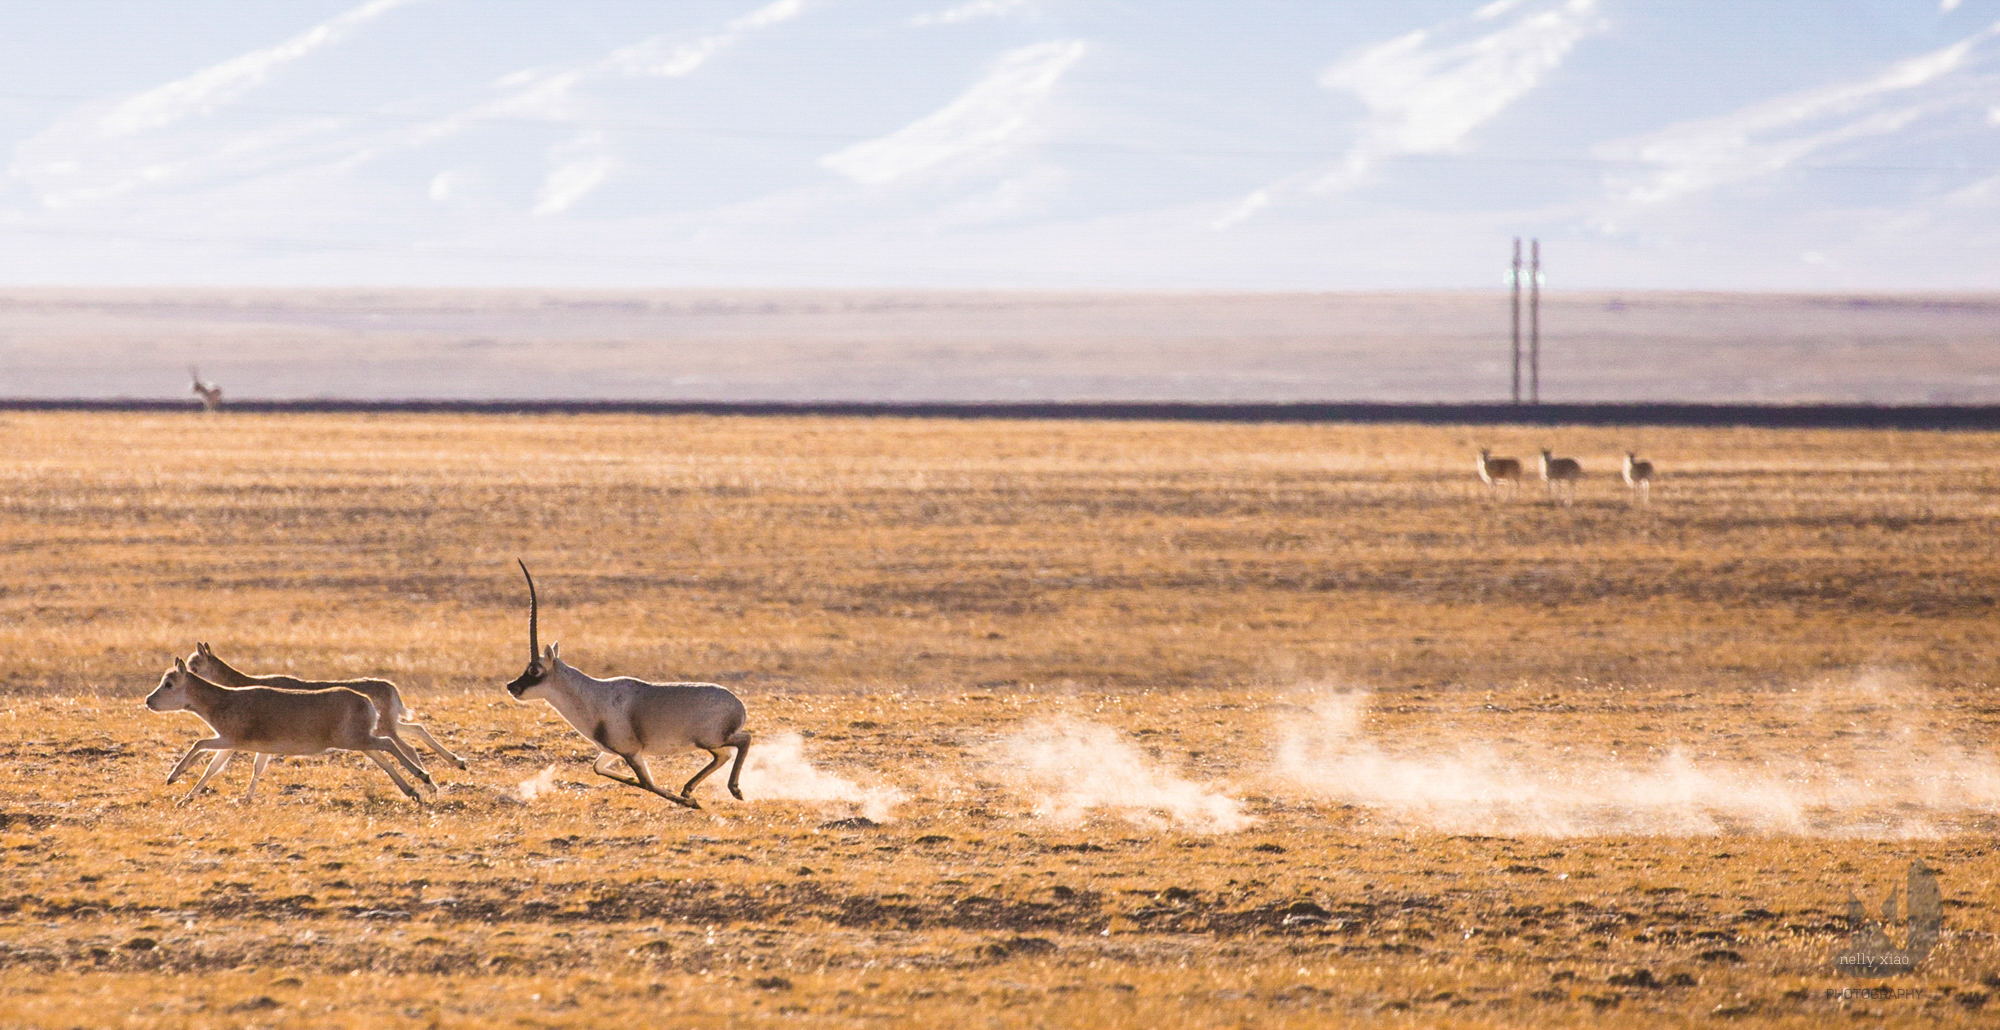   Male Tibetan antelope attempting to court the female herd after winning a mating battle   Kekexili Wildlife Conservation, December 2015 - Mating season 